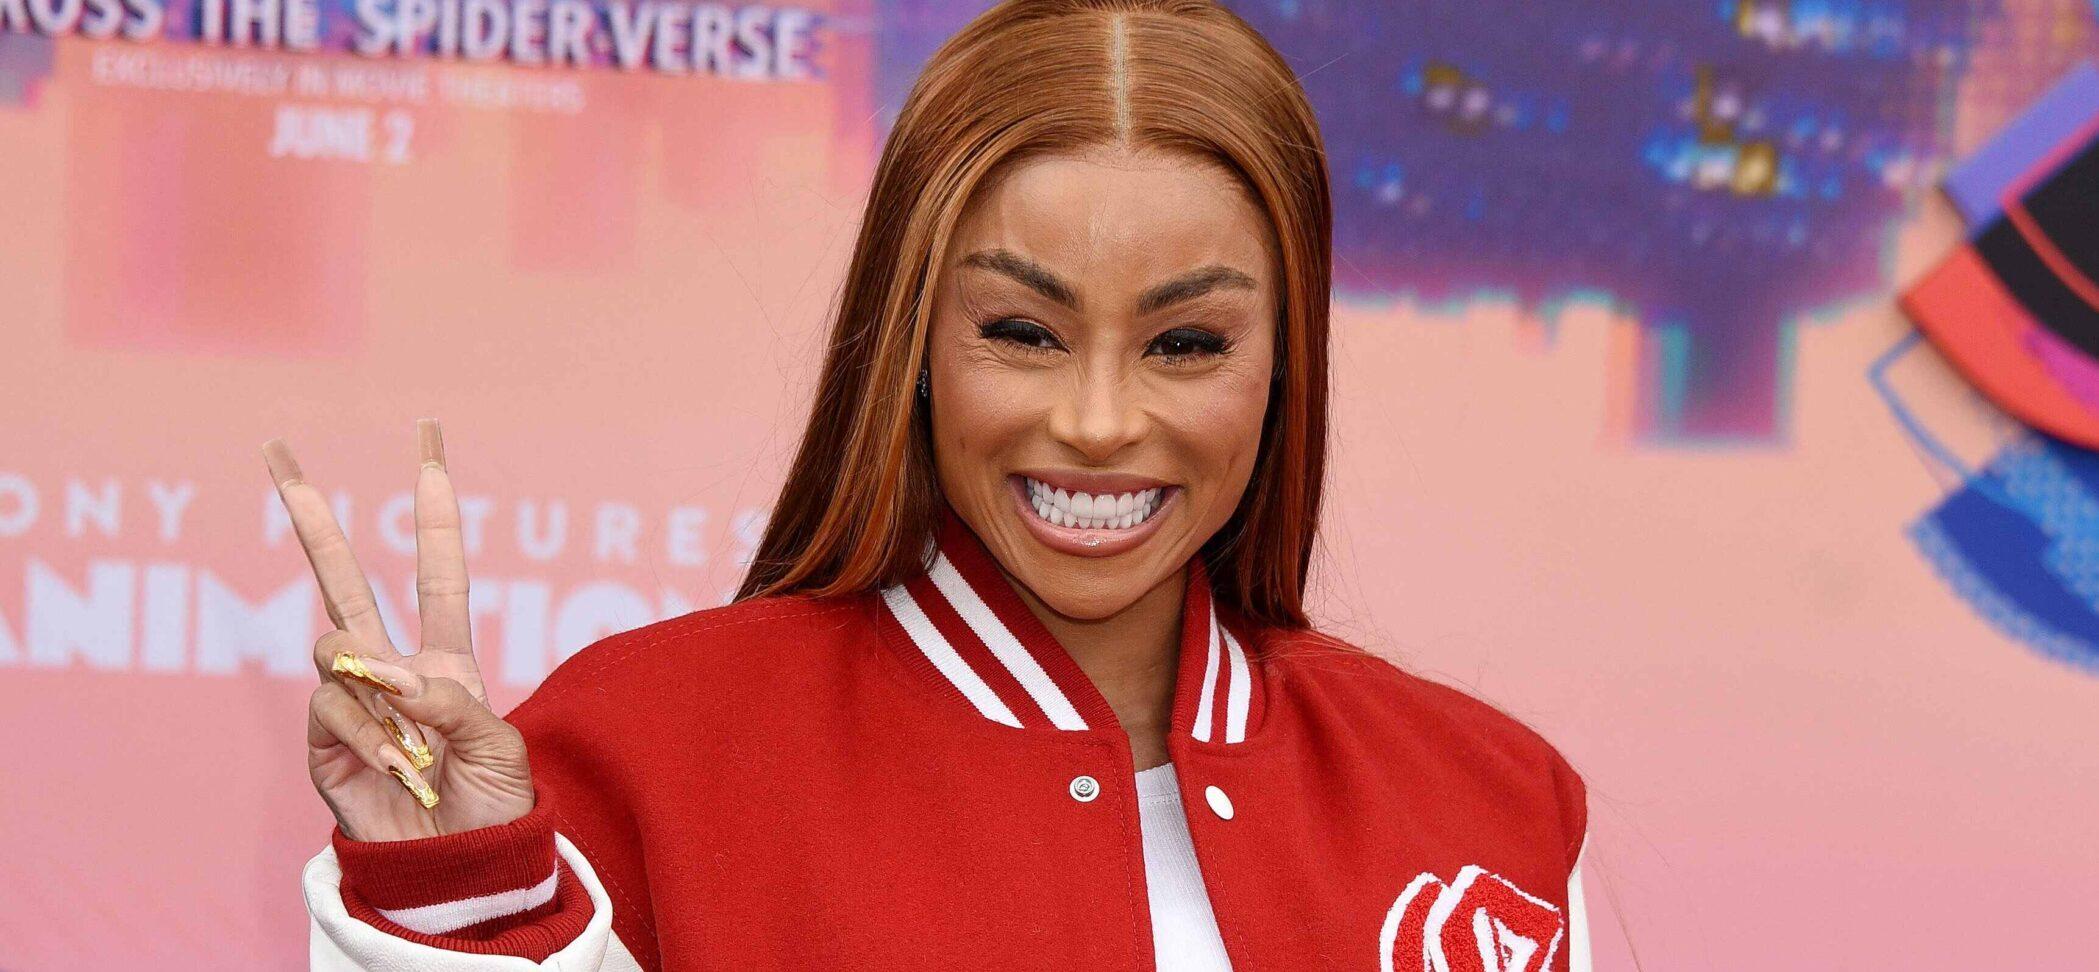 Blac Chyna Is Getting ‘Thrifty’: Breaks Silence On New Hustle To Make Ends Meet!